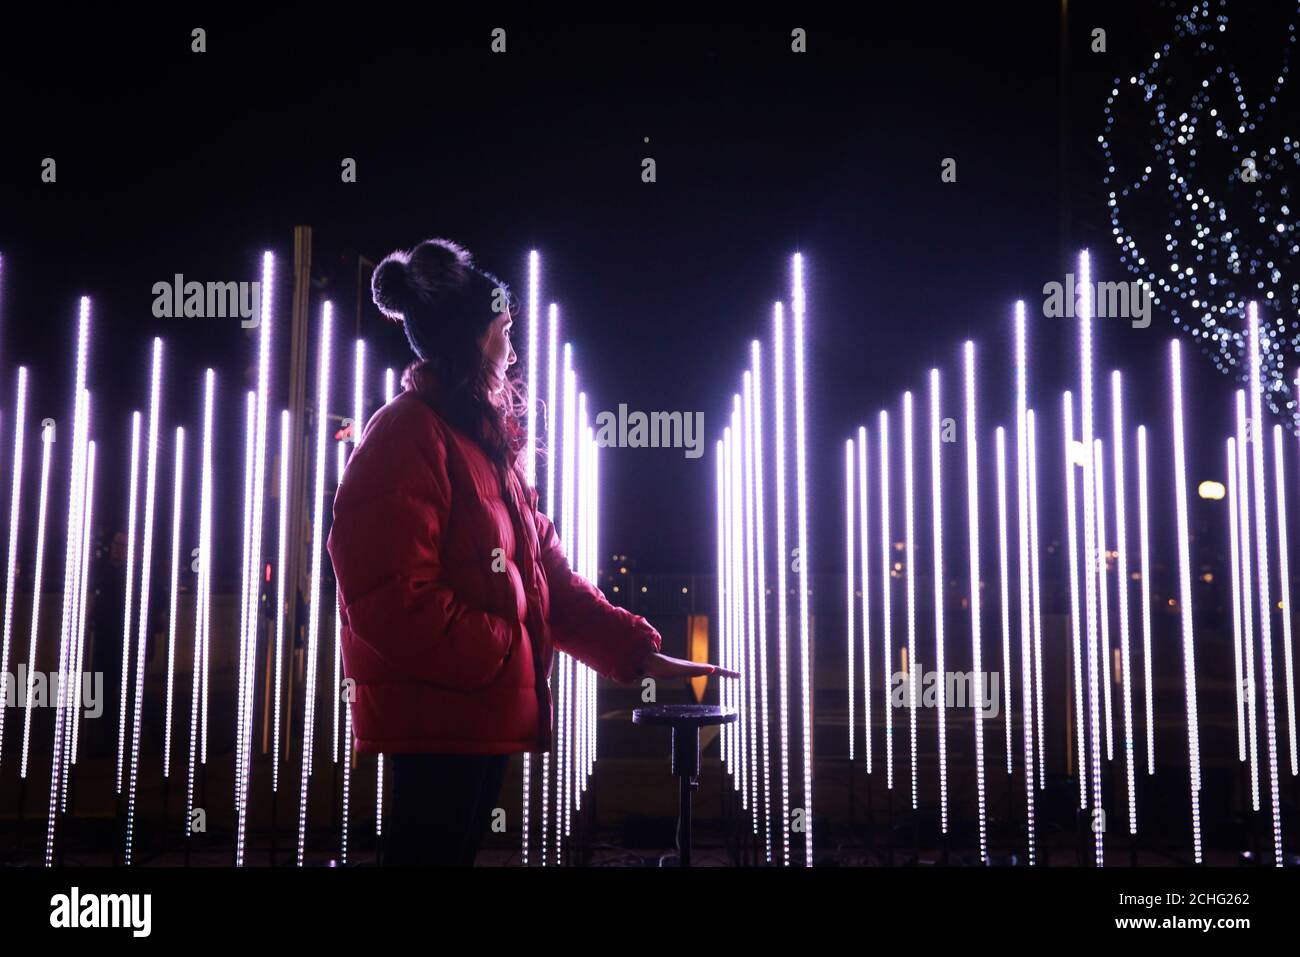 Francesca Clemens interacts with an installation called Stratum by Studio Chelavert at the annual Canary Wharf Winter Lights festival 2020, in east London. Stock Photo